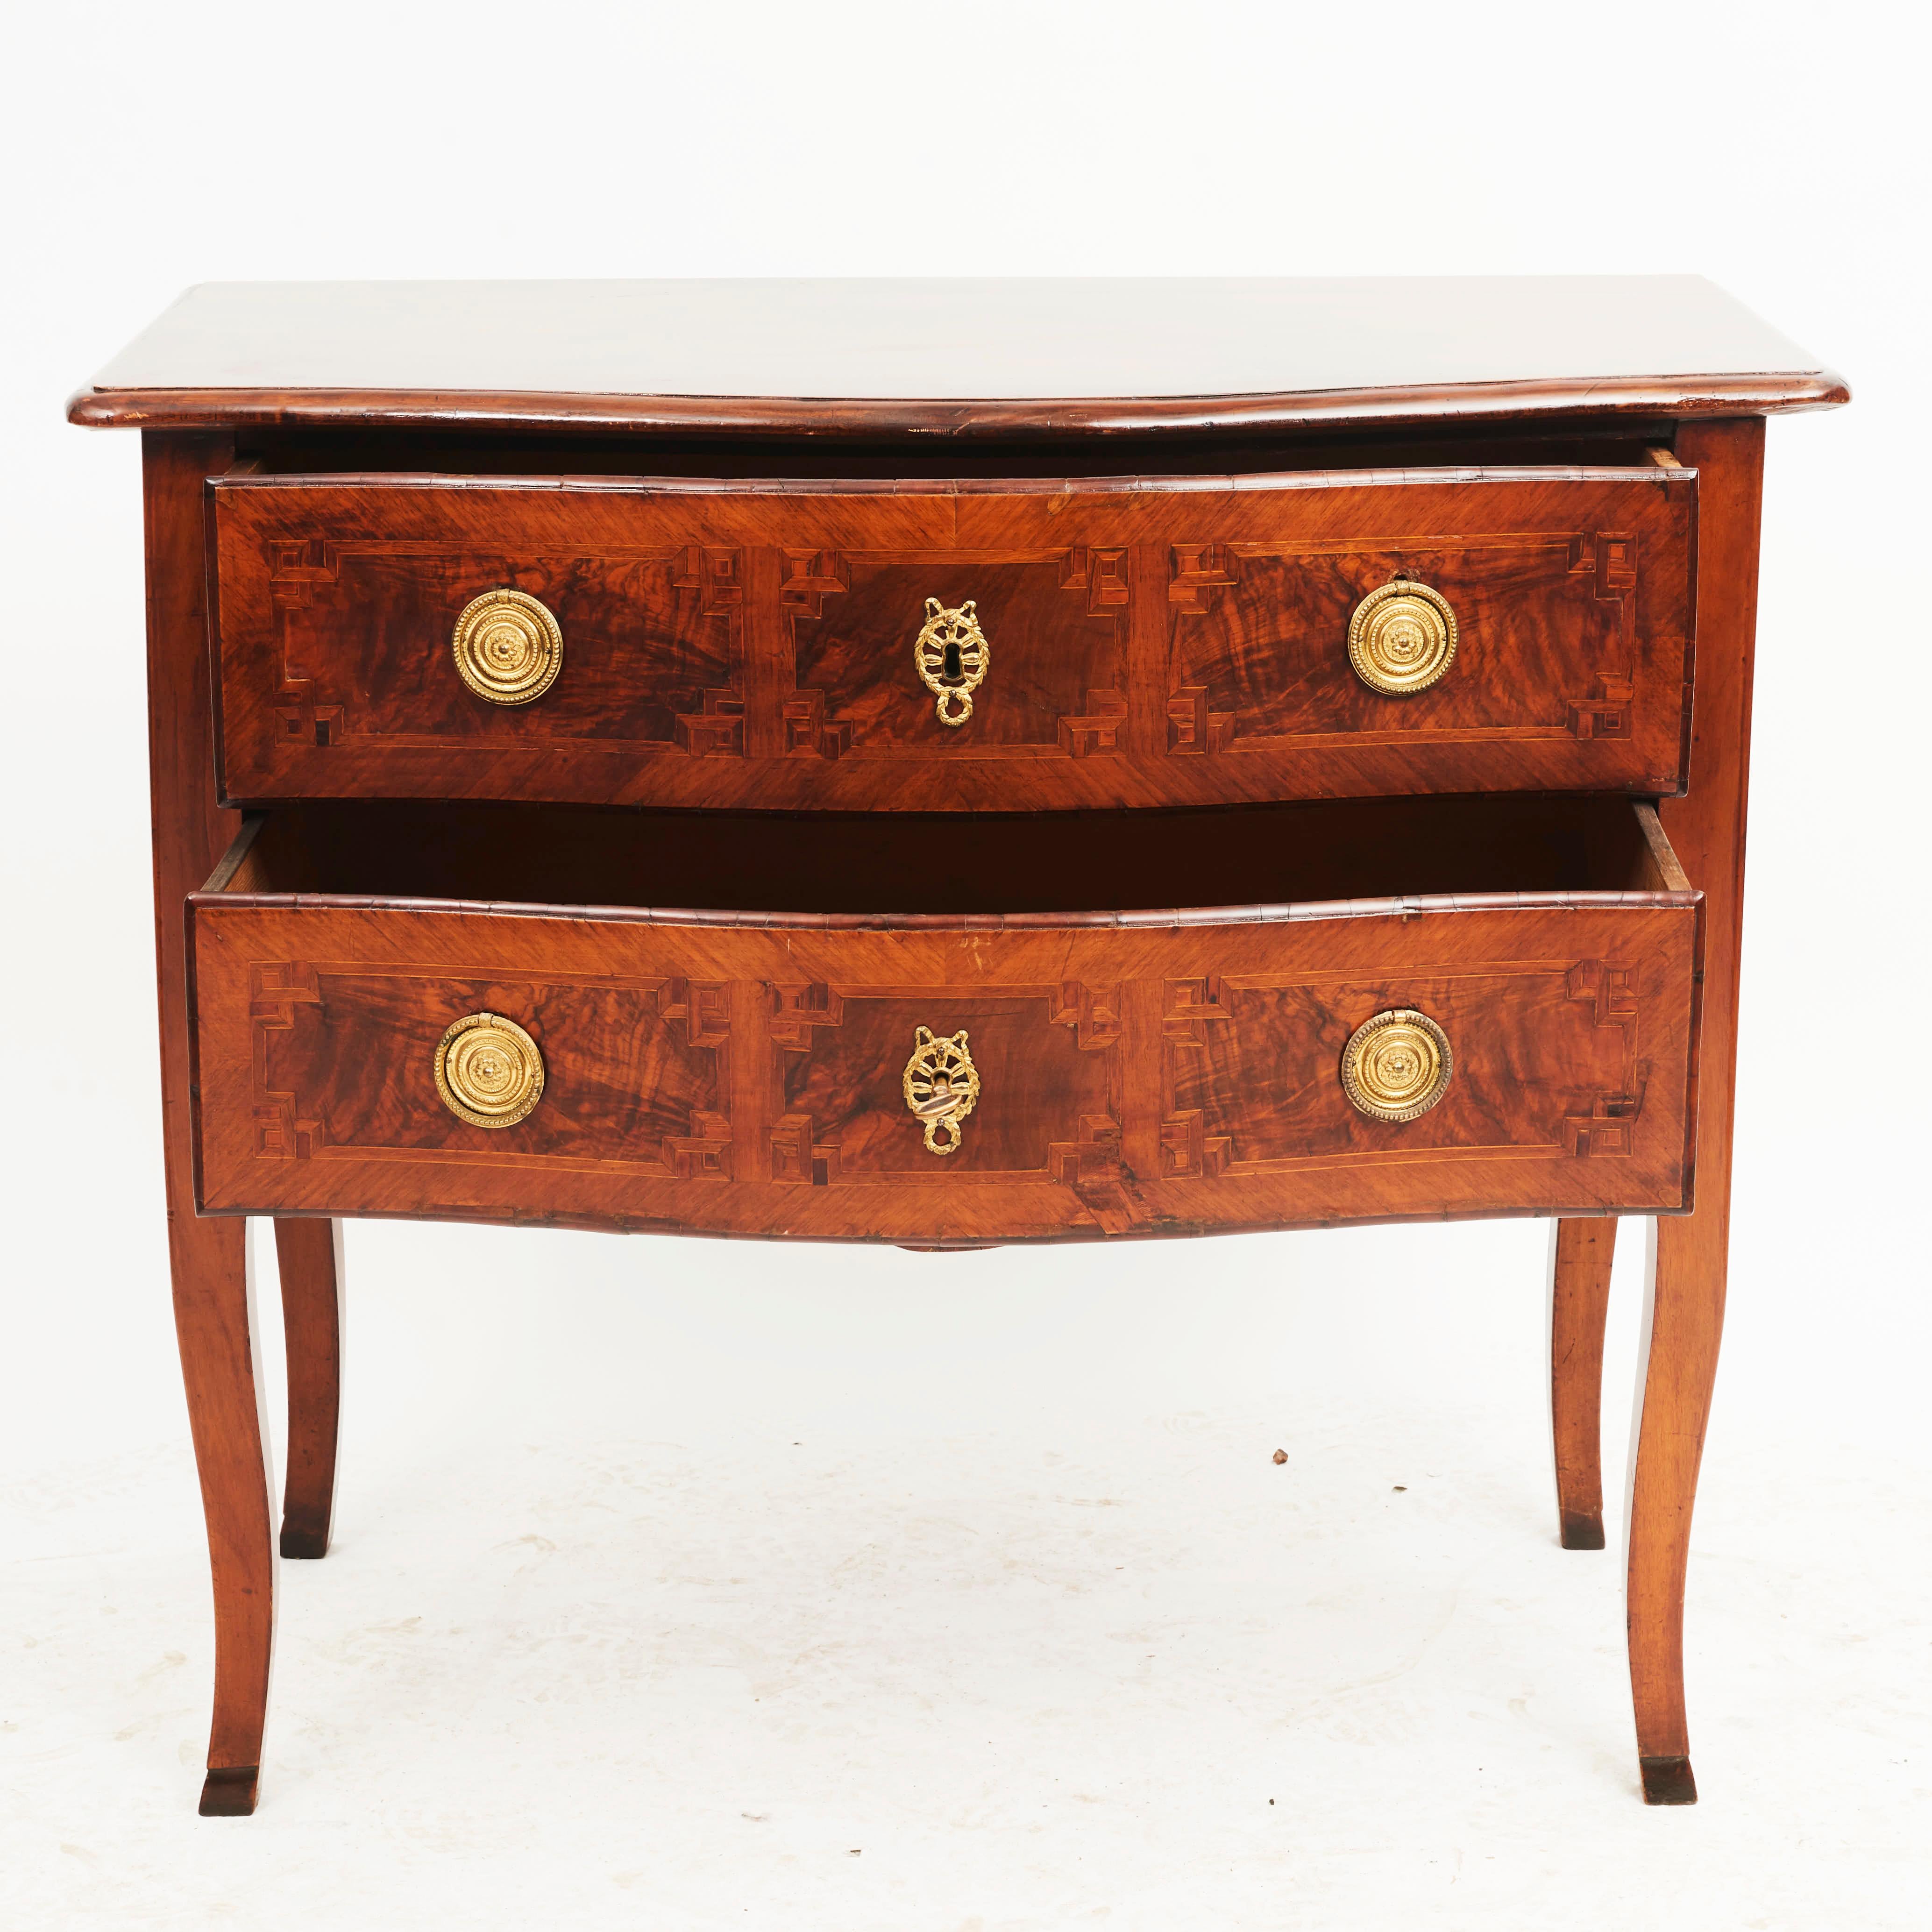 Italian régence two-drawer marquetry commode.
Top in solid walnut, bottom section veneered in walnut. Fronts inlaid with geometric motif borders.
Standing on saber legs ending in feet.
Original condition with a light french polish.
Italy circa